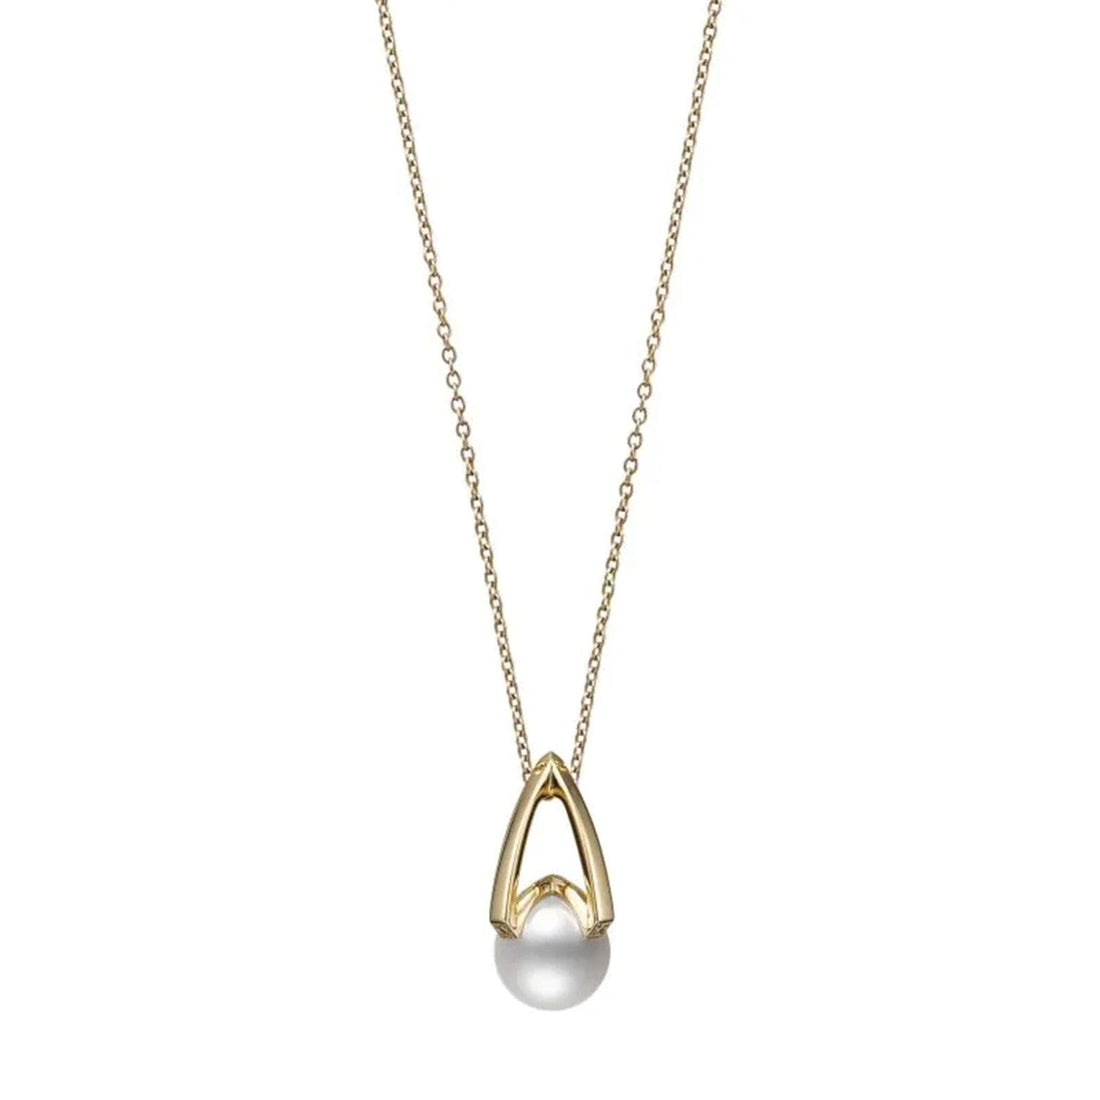 Mikimoto M Collection Pearl Pendant Necklace